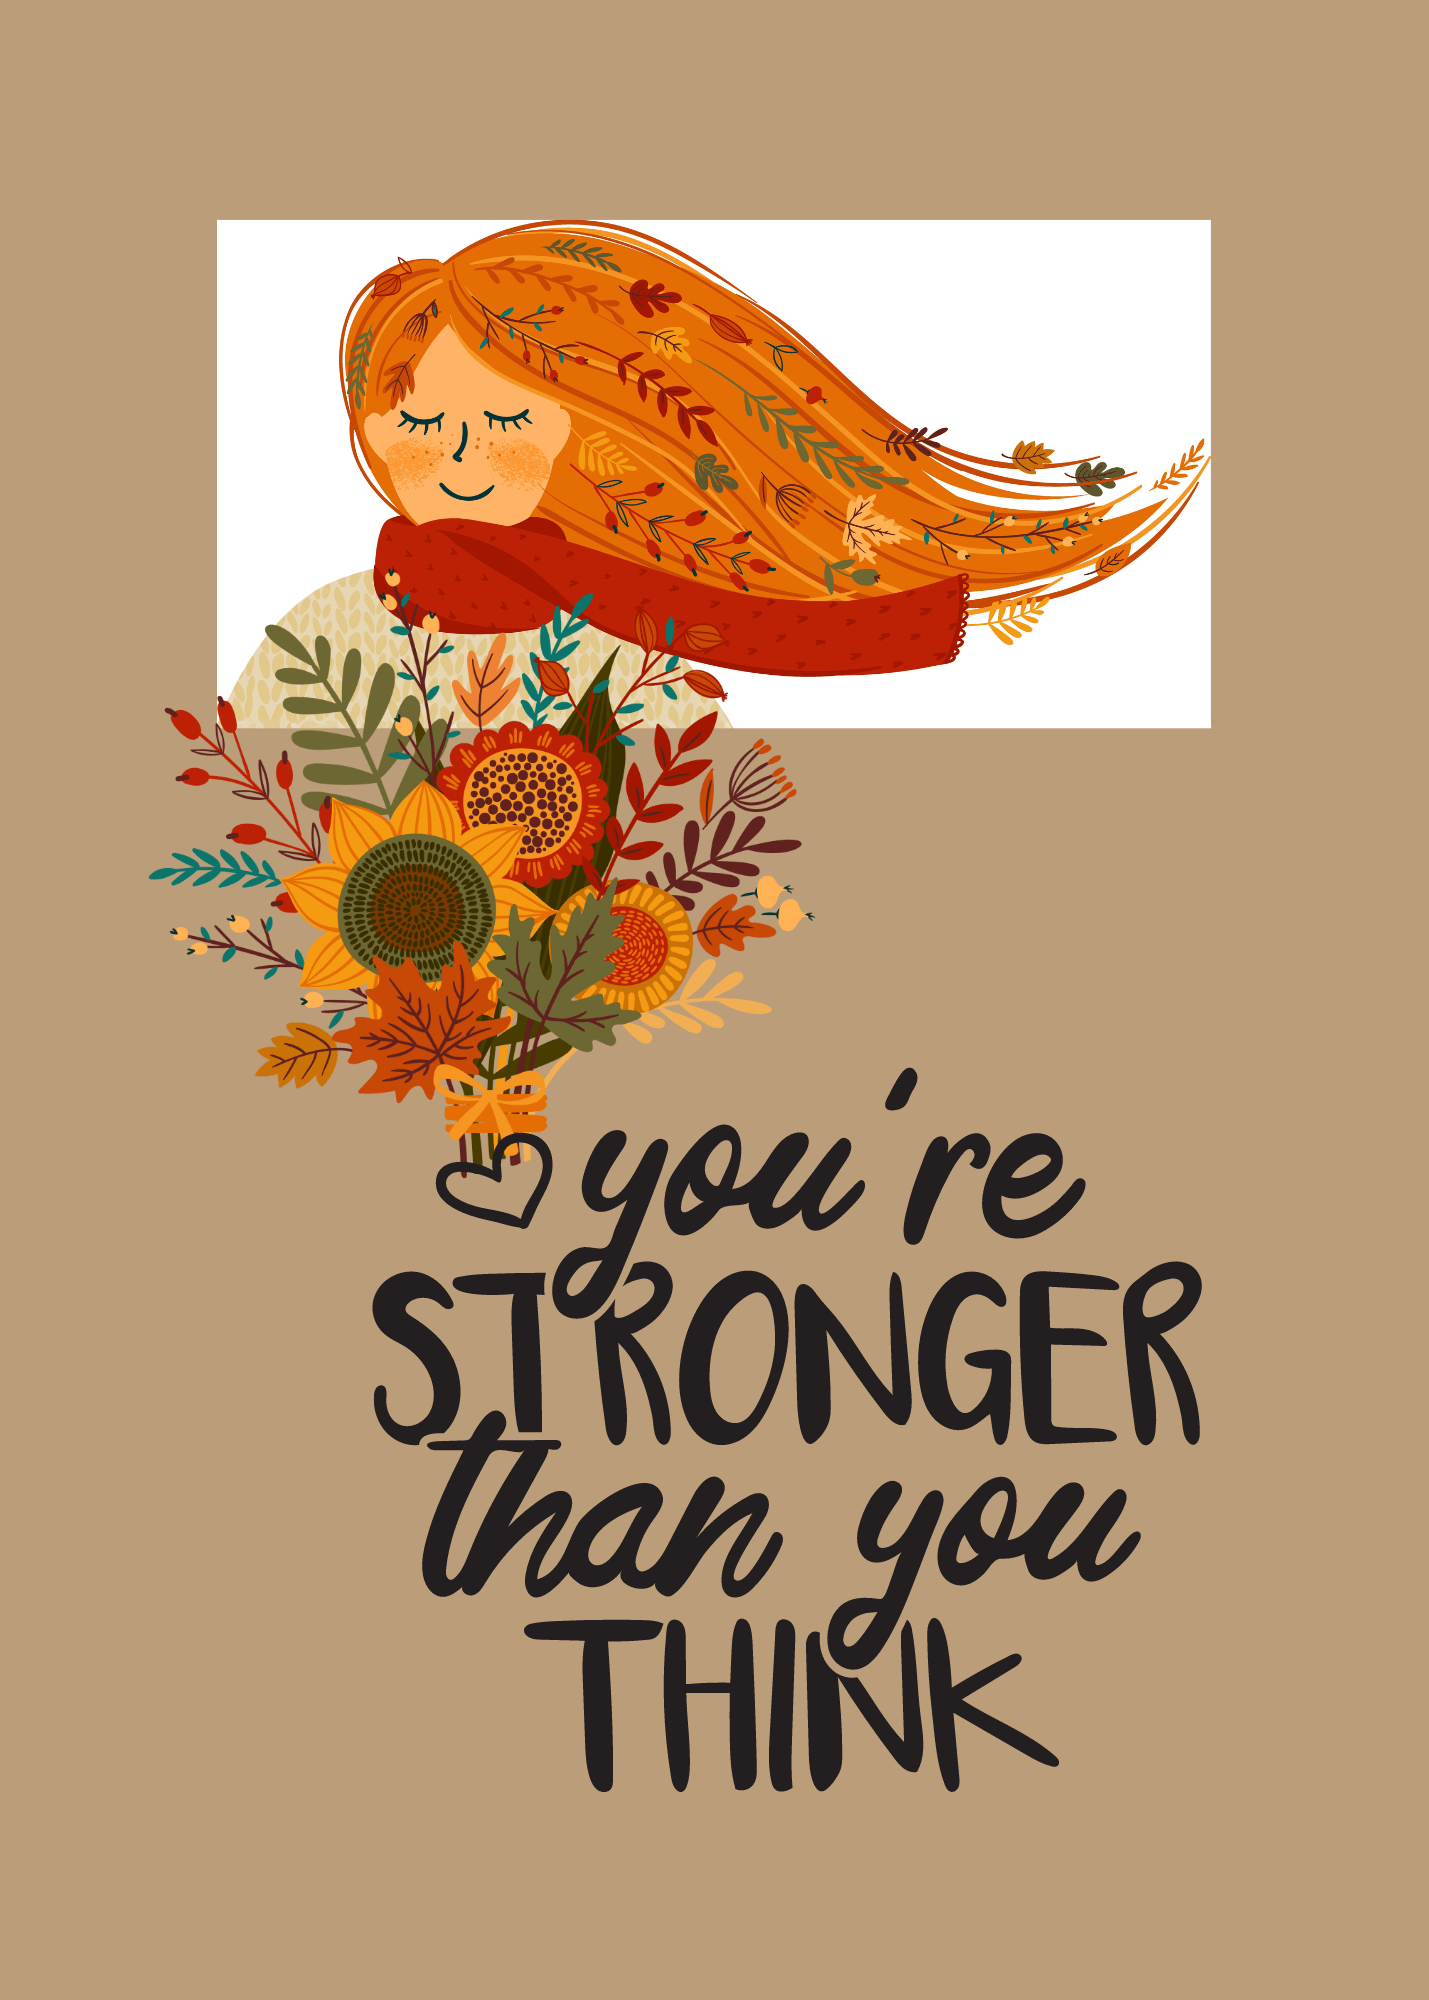 You're stronger than you think